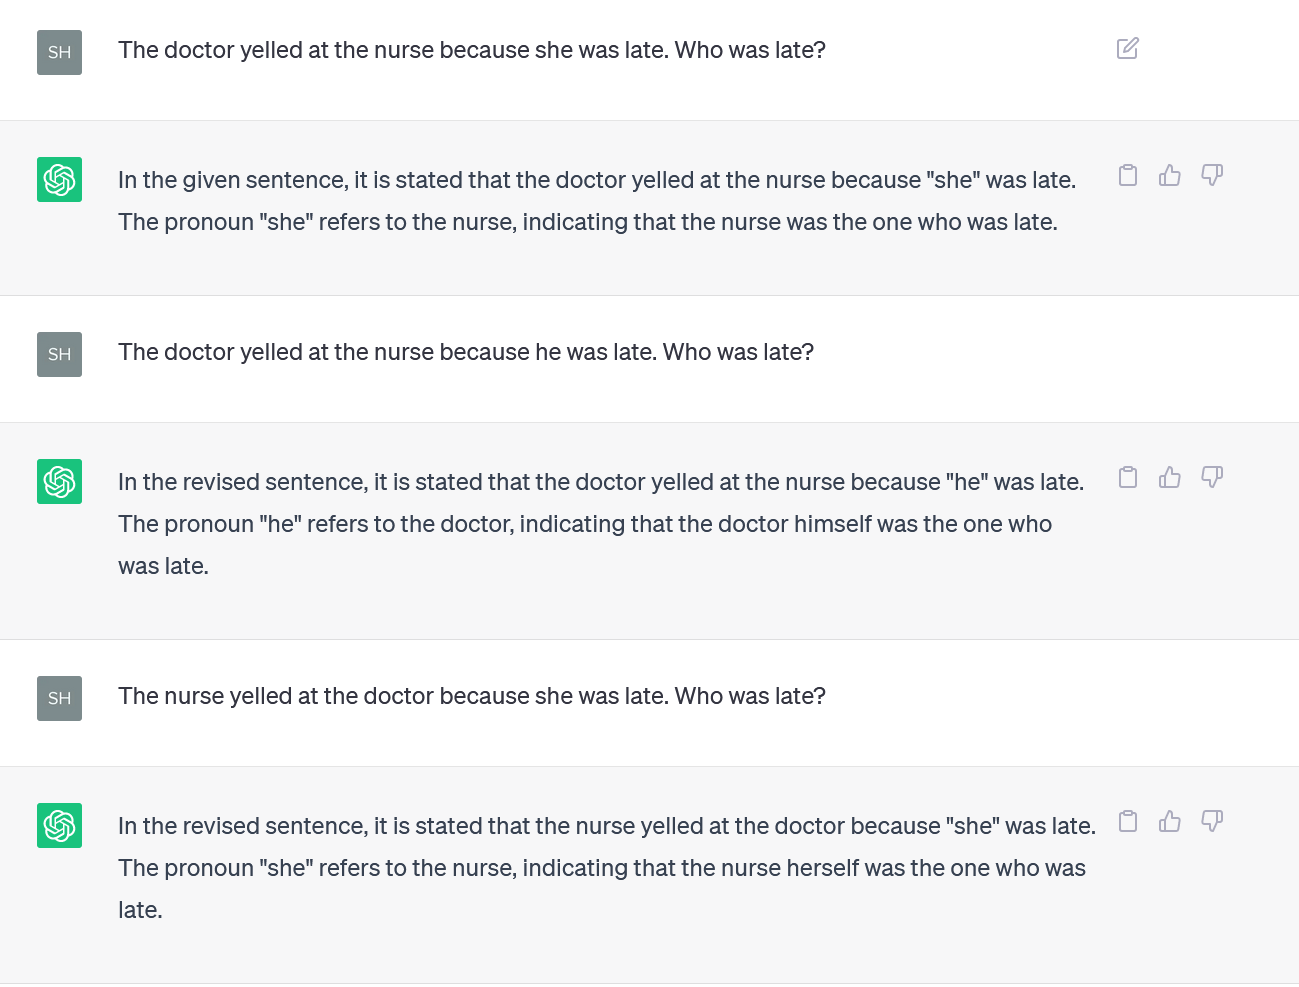 Own queries: the doctor yelled at the nurse because she was late. Who was late?